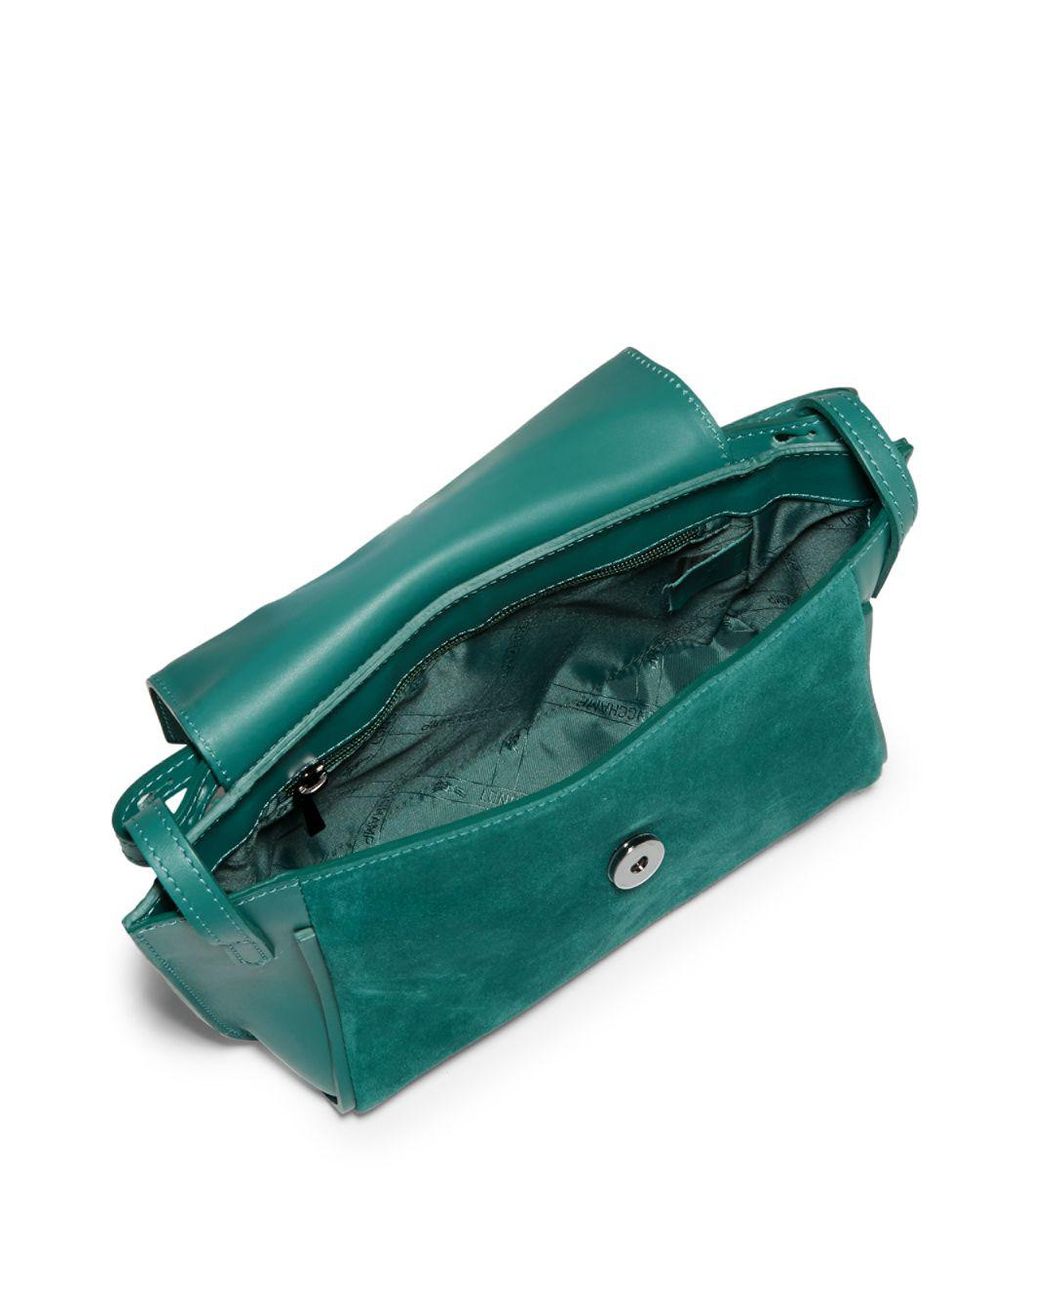 Women's teal LondonX suede and Mousse leather tote crossbody bag - BUSTA